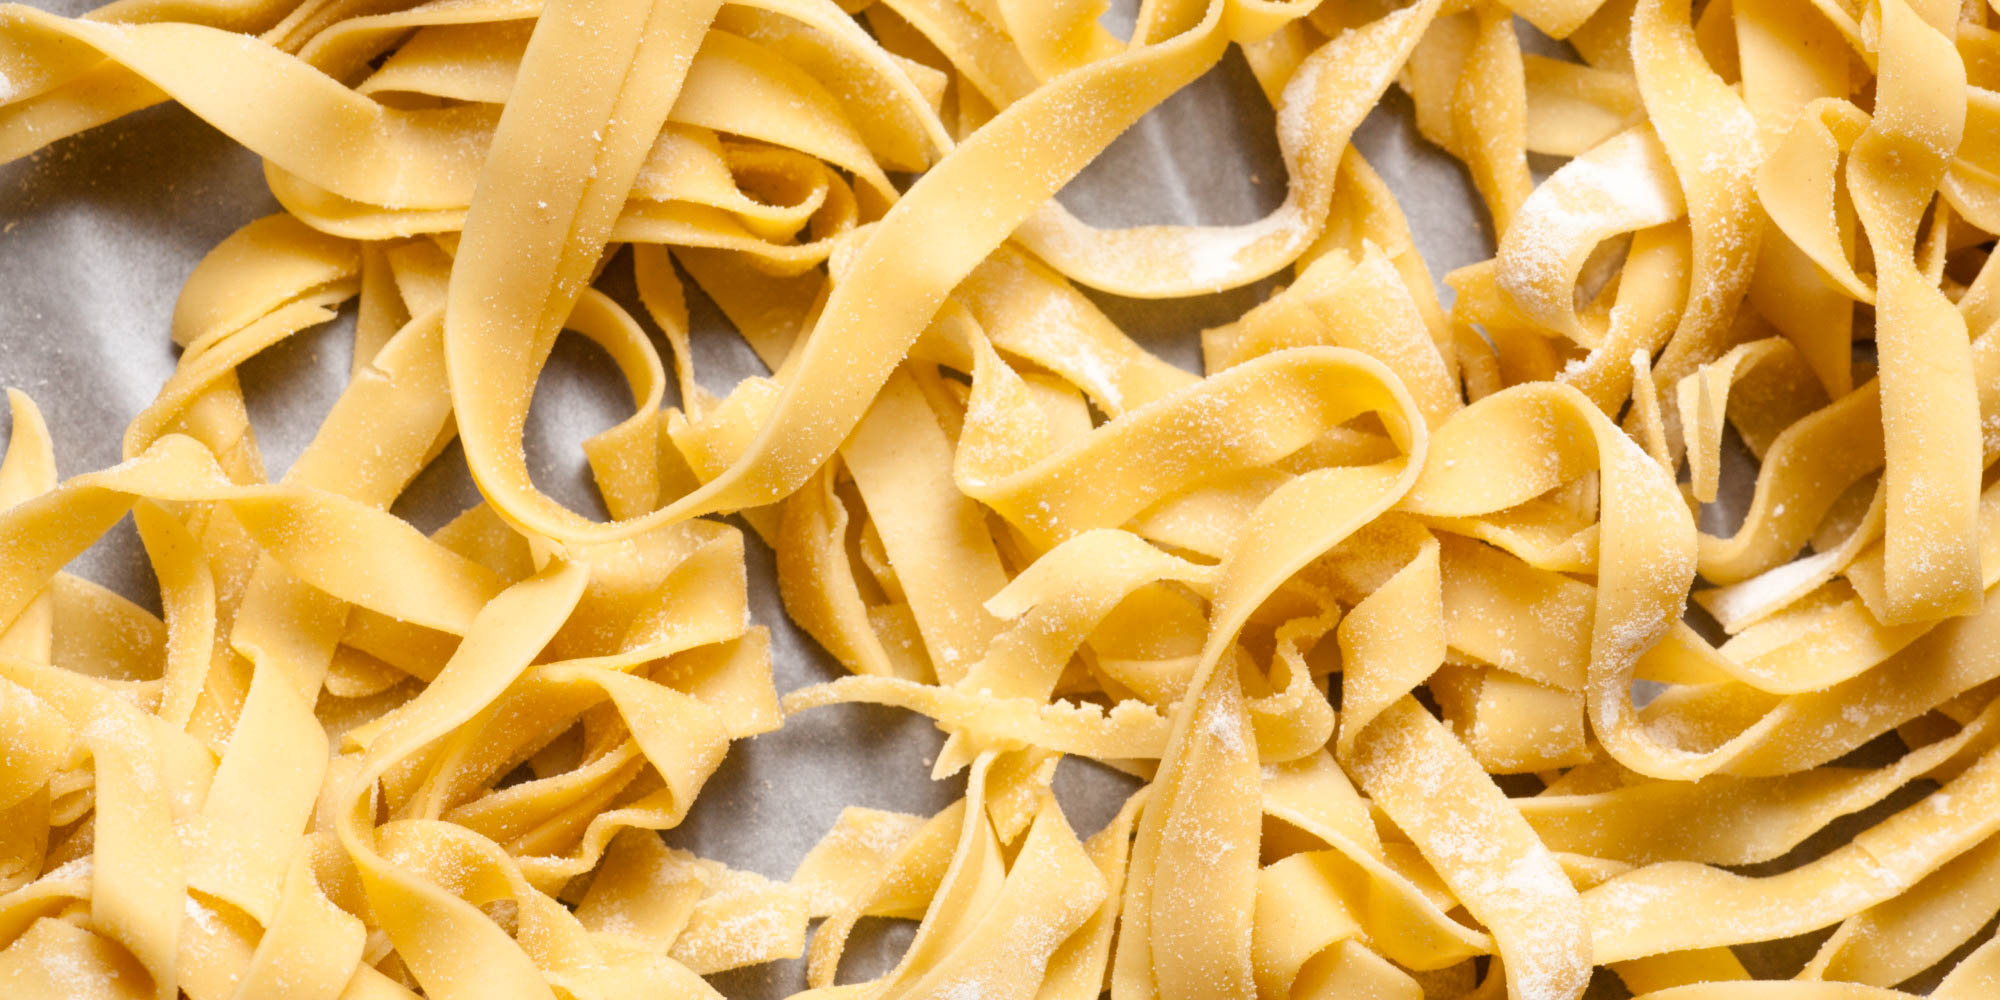 What's For Dinner: Homemade Pasta - A Food Lovers Series